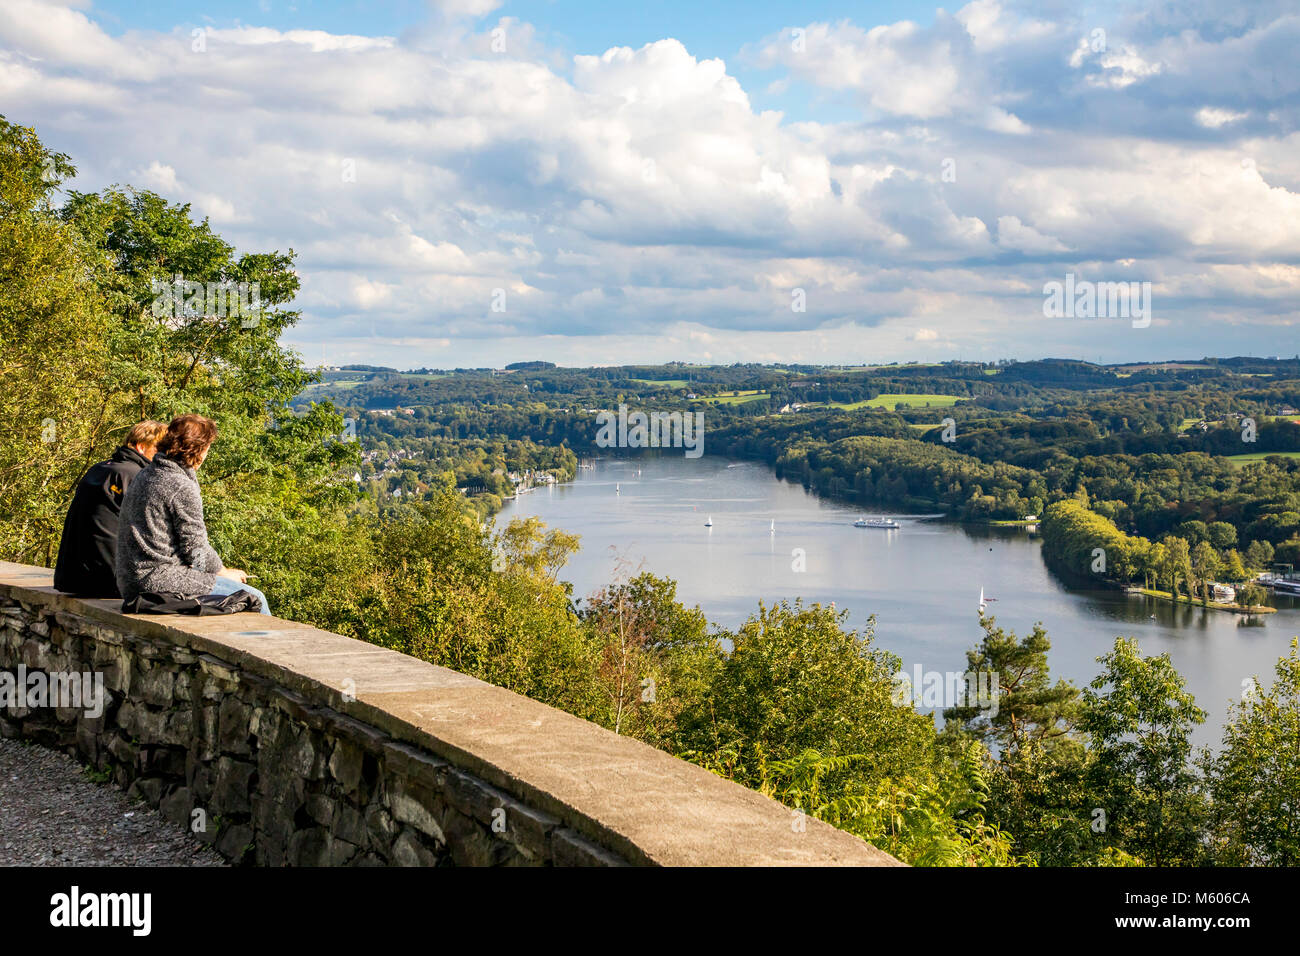 The Baldeneysee Lake, a reservoir of river Ruhr, in Essen, Germany, view point Korte Klippe, above the lake, Stock Photo